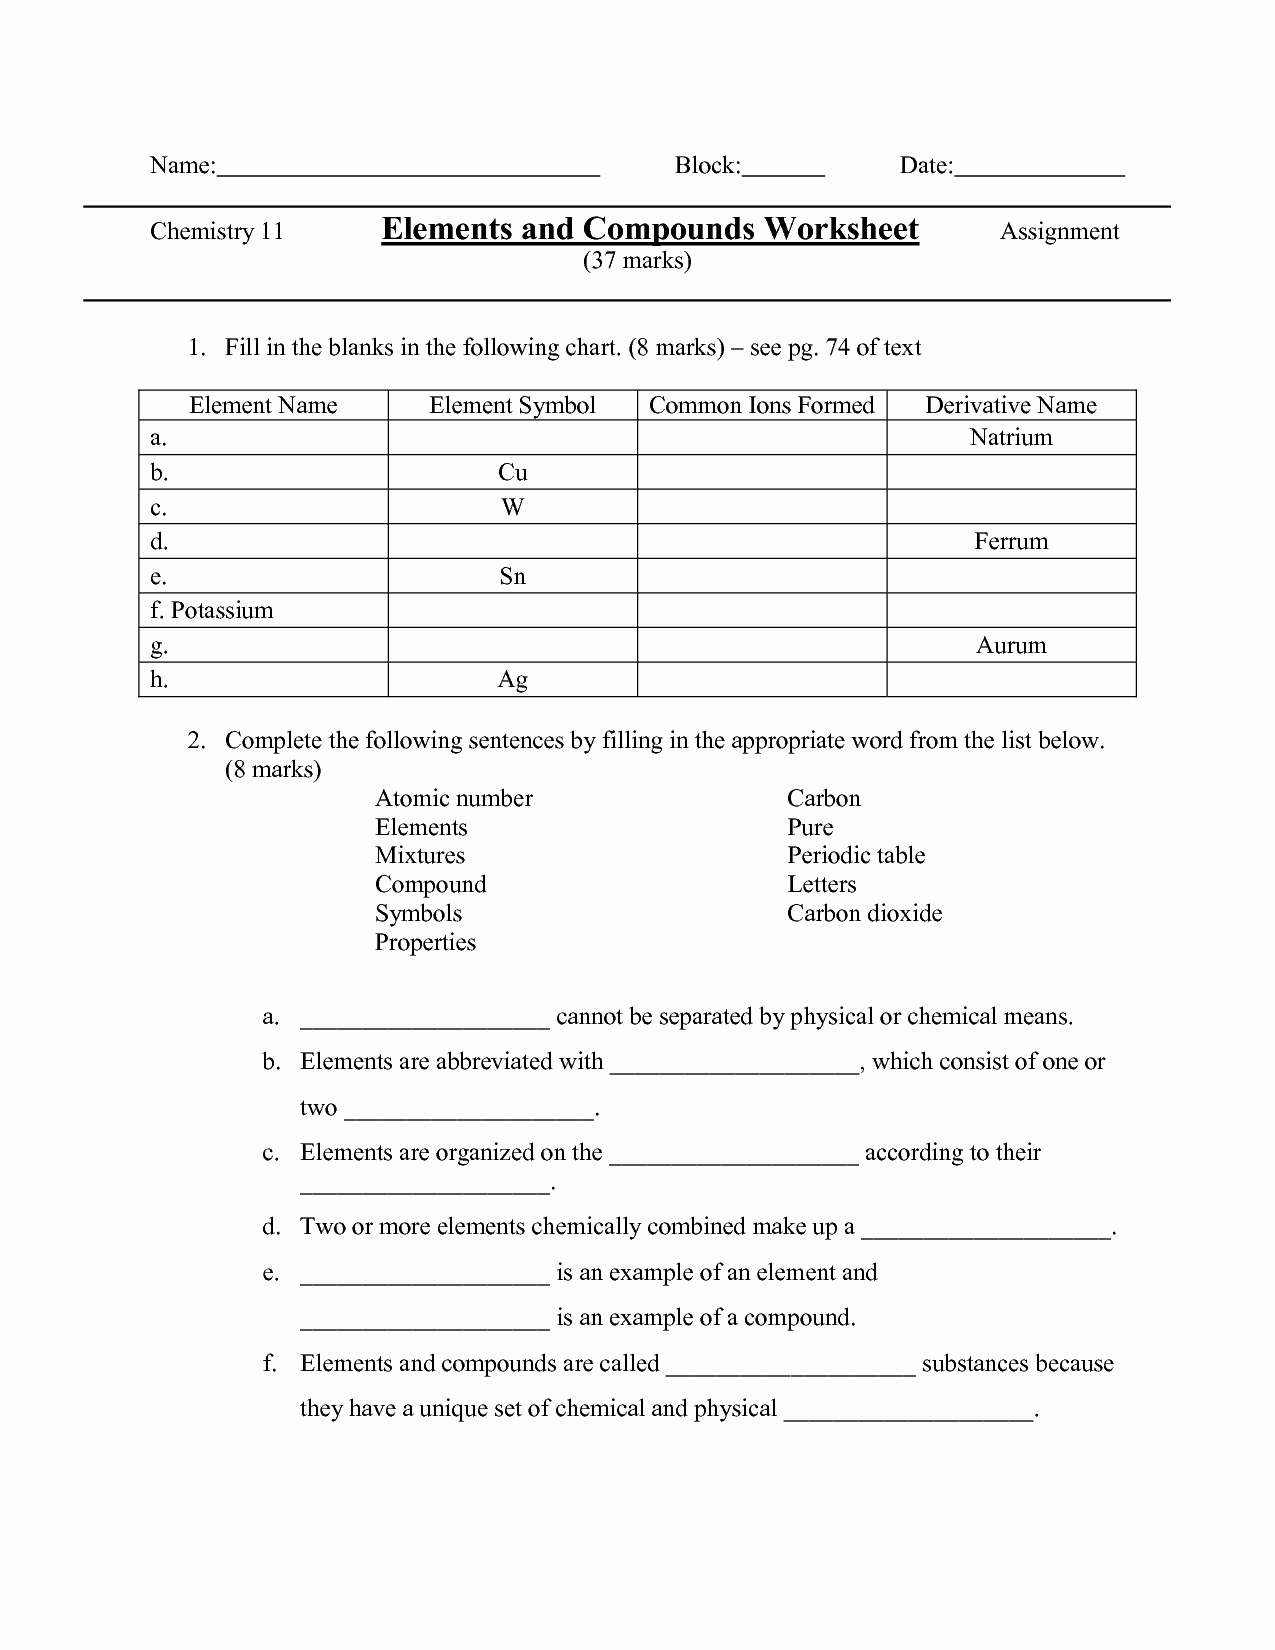 Element Compound Mixture Worksheet Awesome 9 Best Of Chemistry Elements and Symbols Worksheets